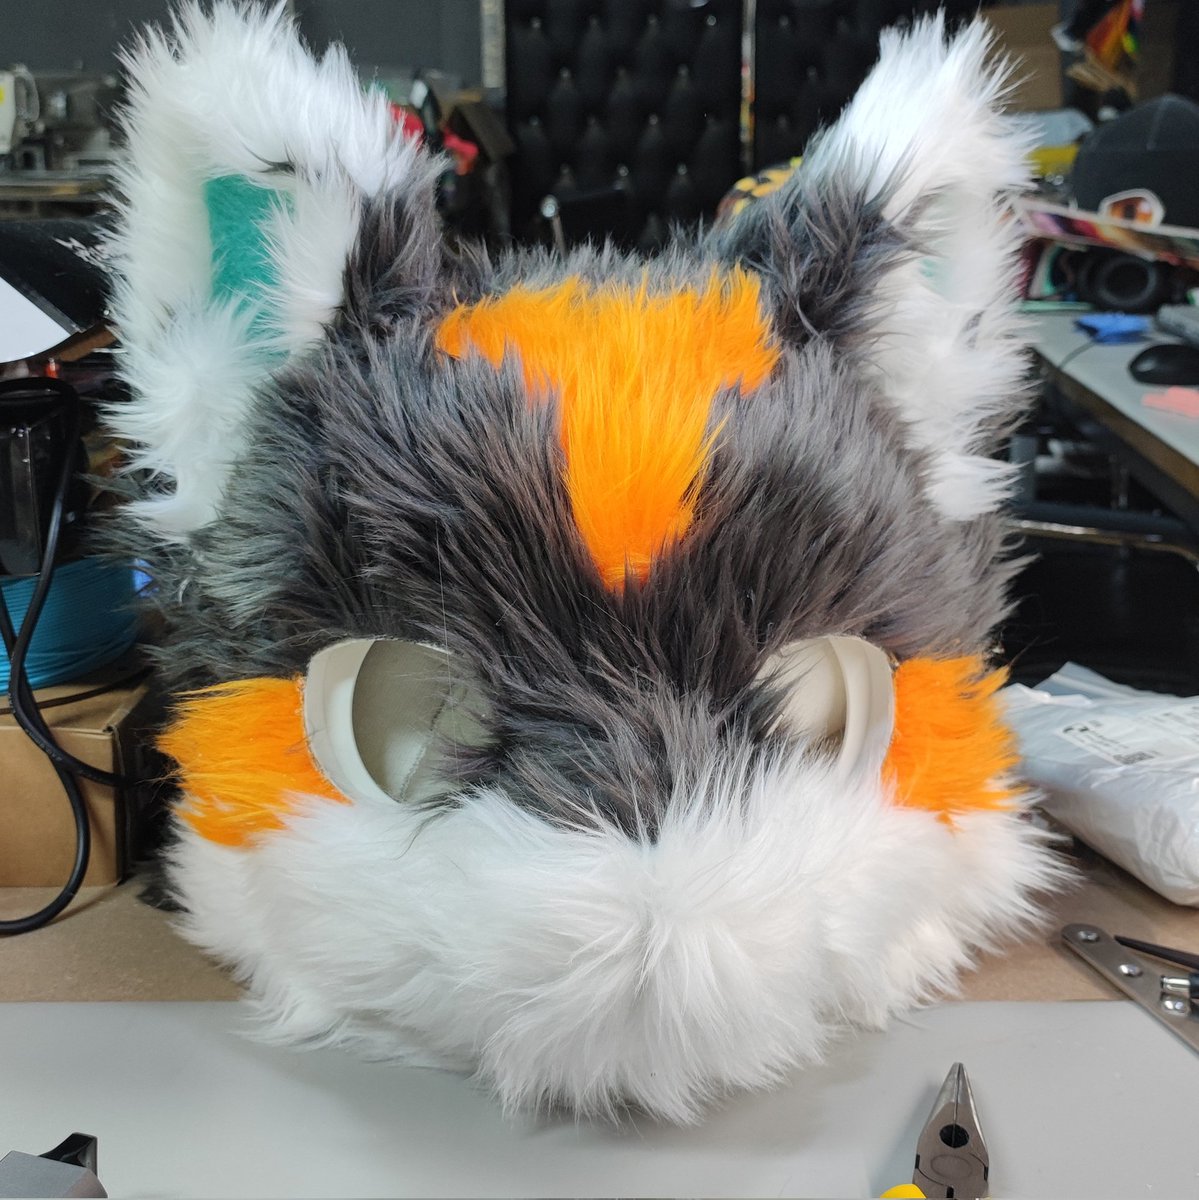 Wip! I have to work harder for my own life! 🤧
#fursuitmaker